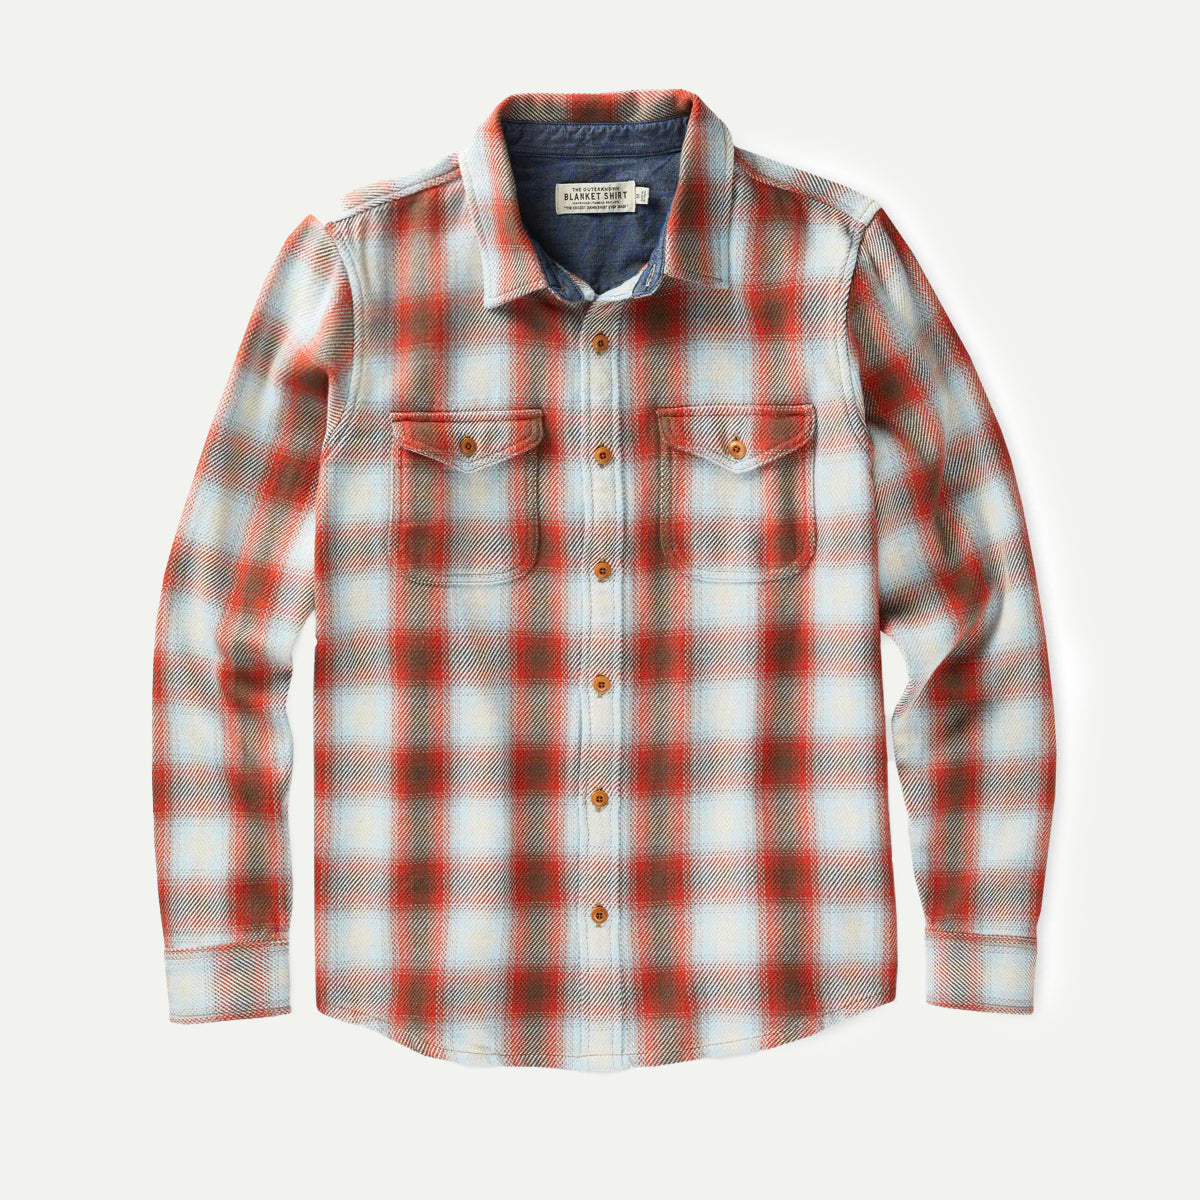 Outerknown Titian Rust Sands Plaid Blanket Shirt